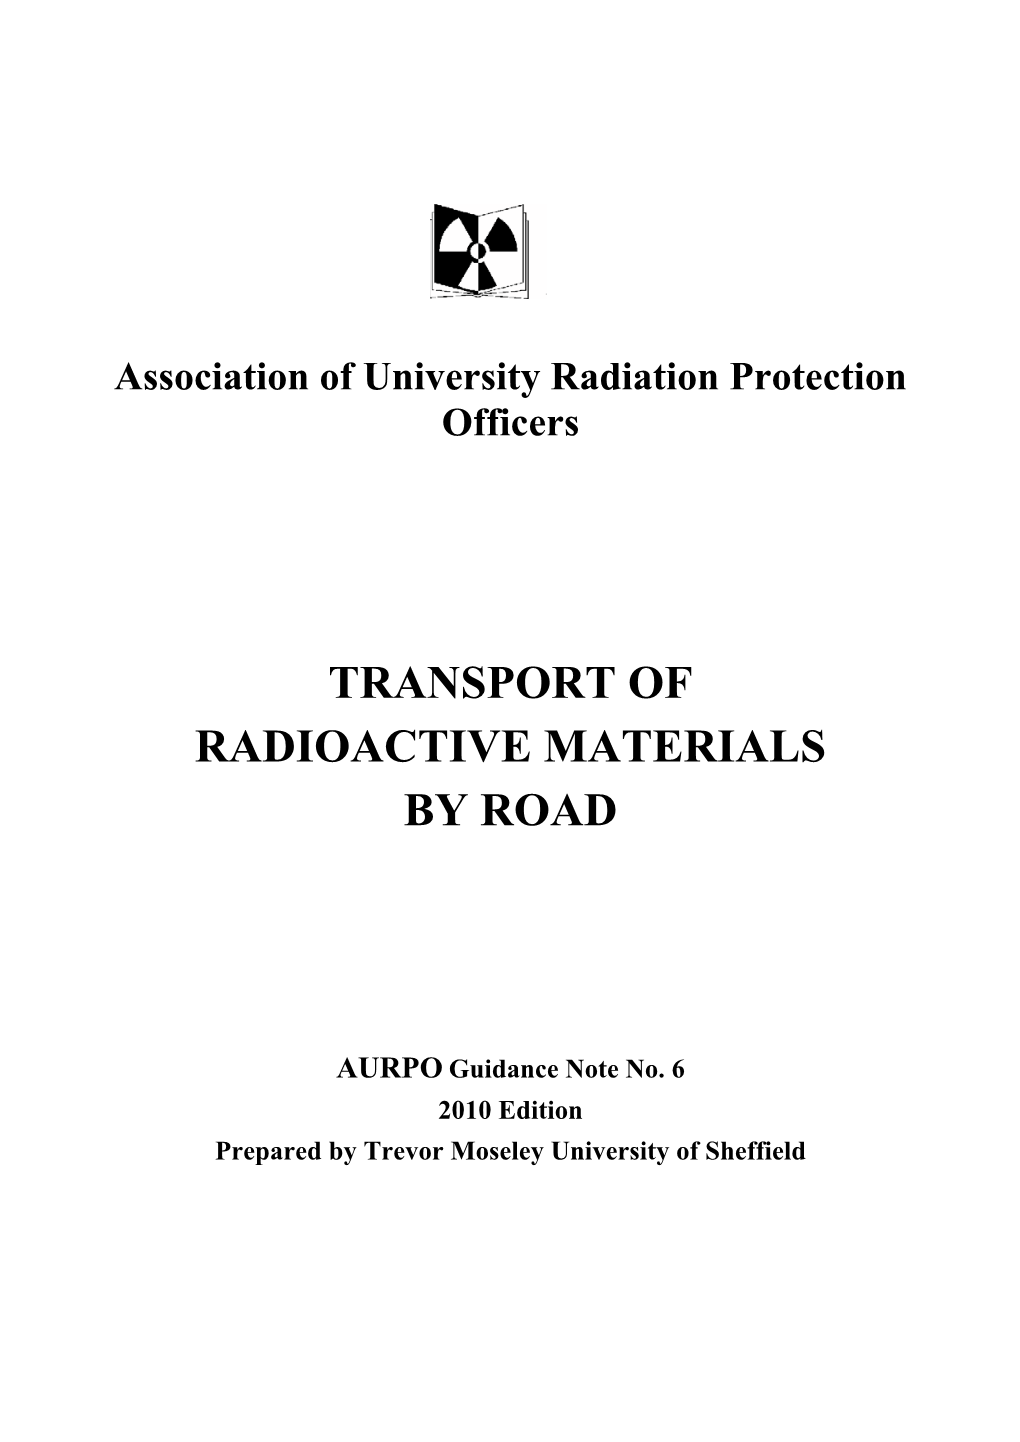 Transport of Radioactive Materials by Road